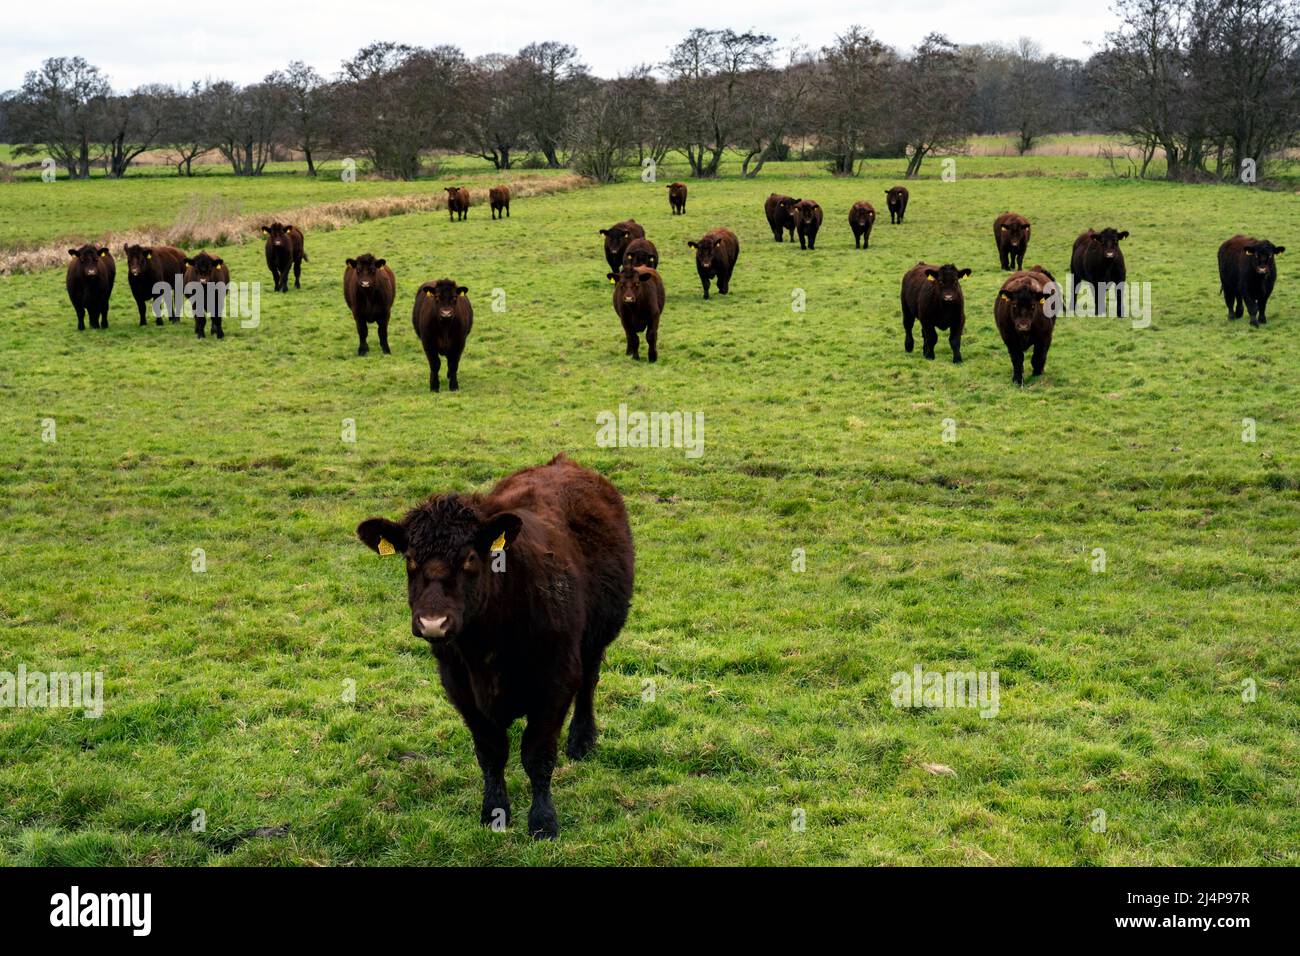 Lincoln beef cattle Stock Photo